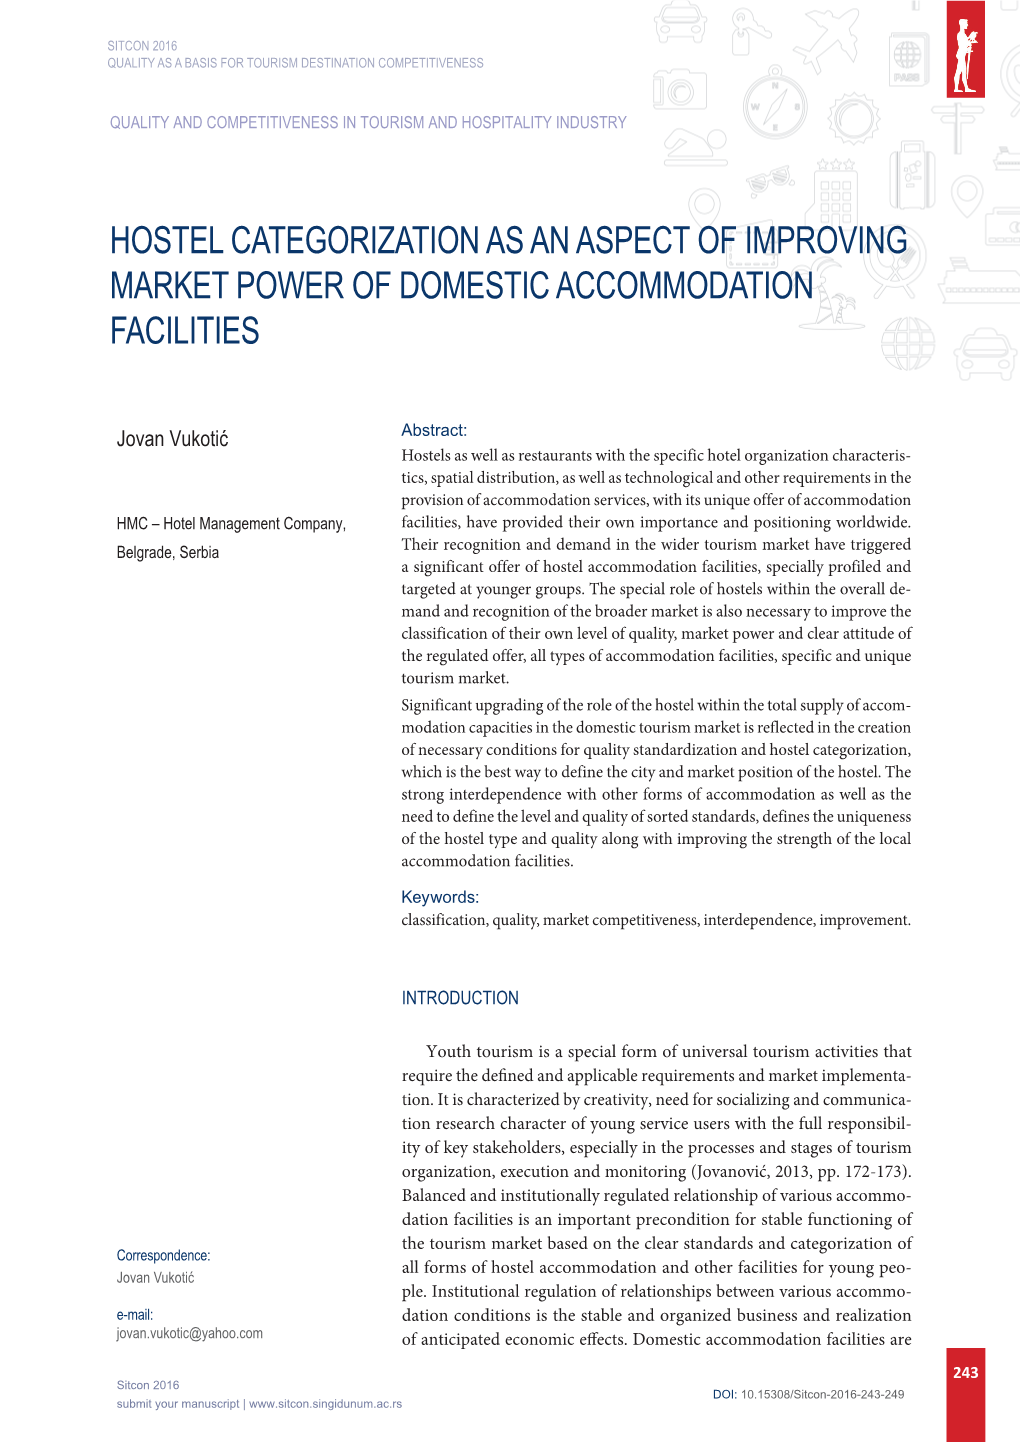 Hostel Categorization As an Aspect of Improving Market Power of Domestic Accommodation Facilities